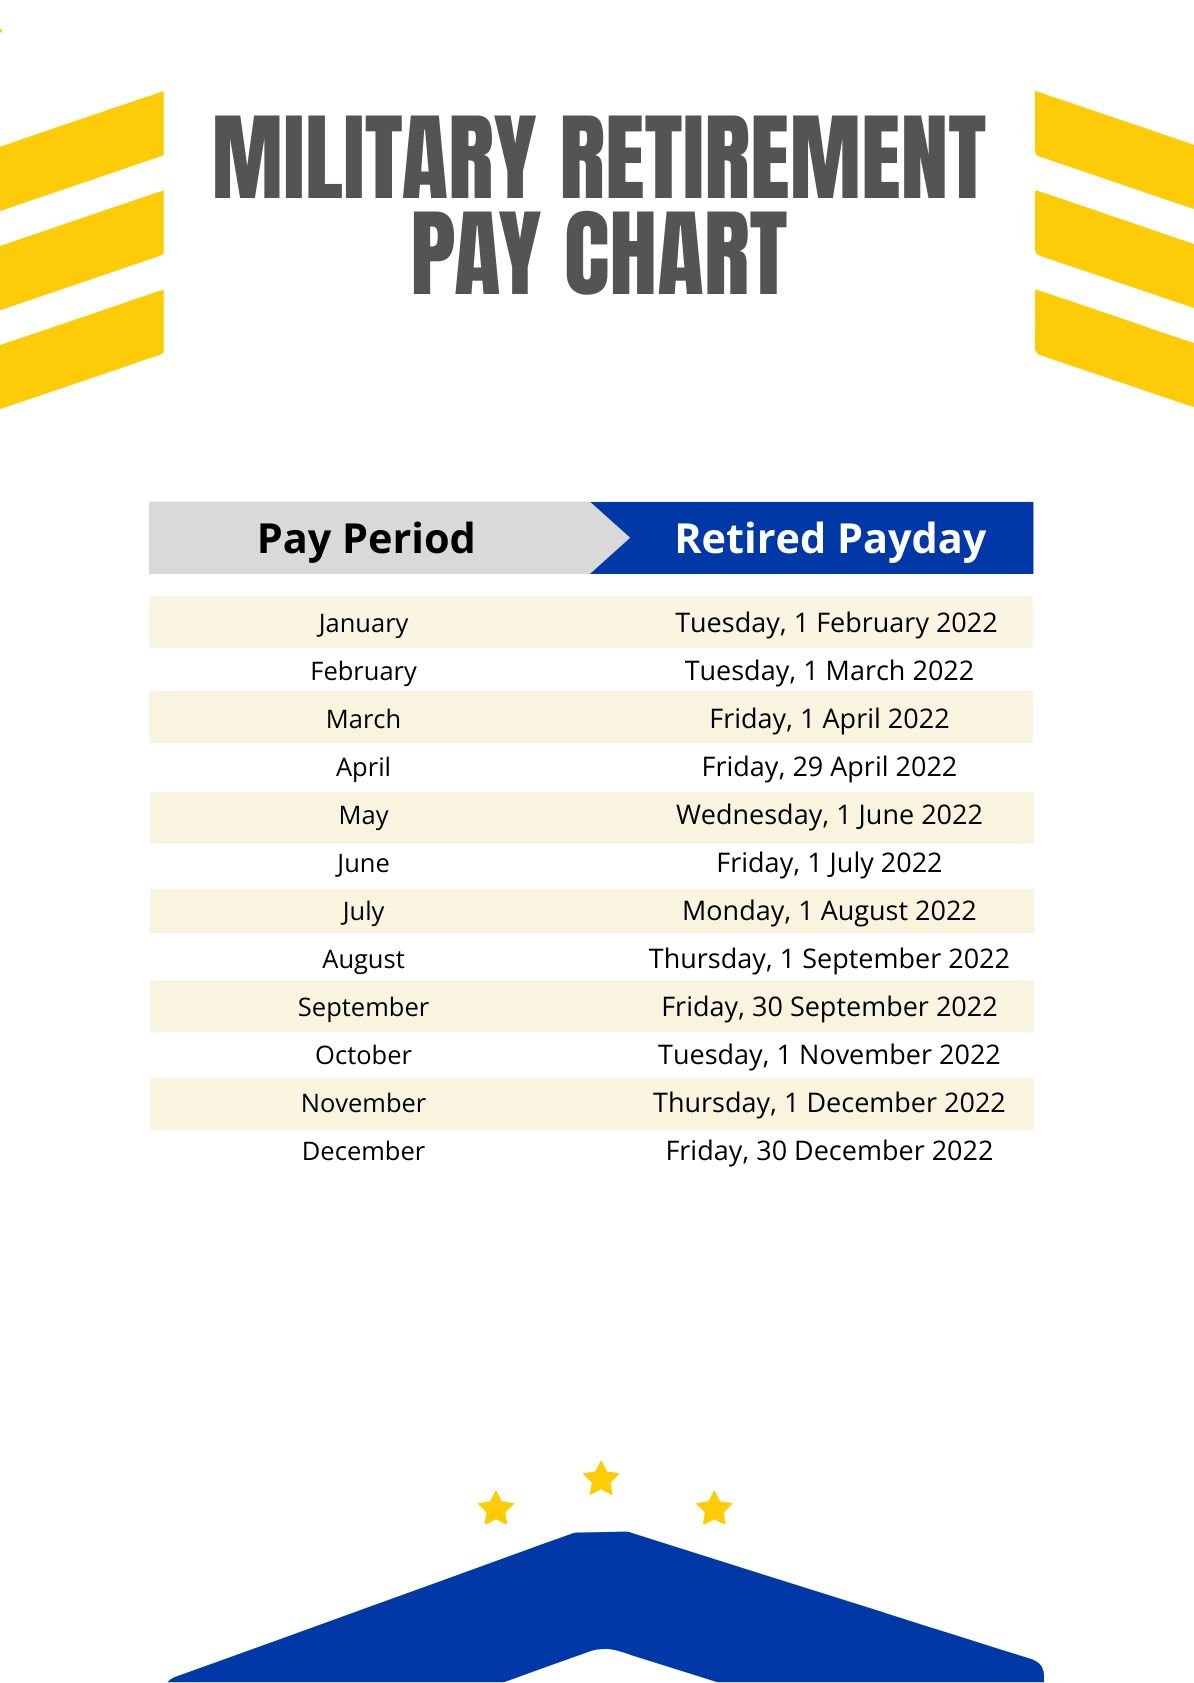 Military Retirement Pay Chart in PDF